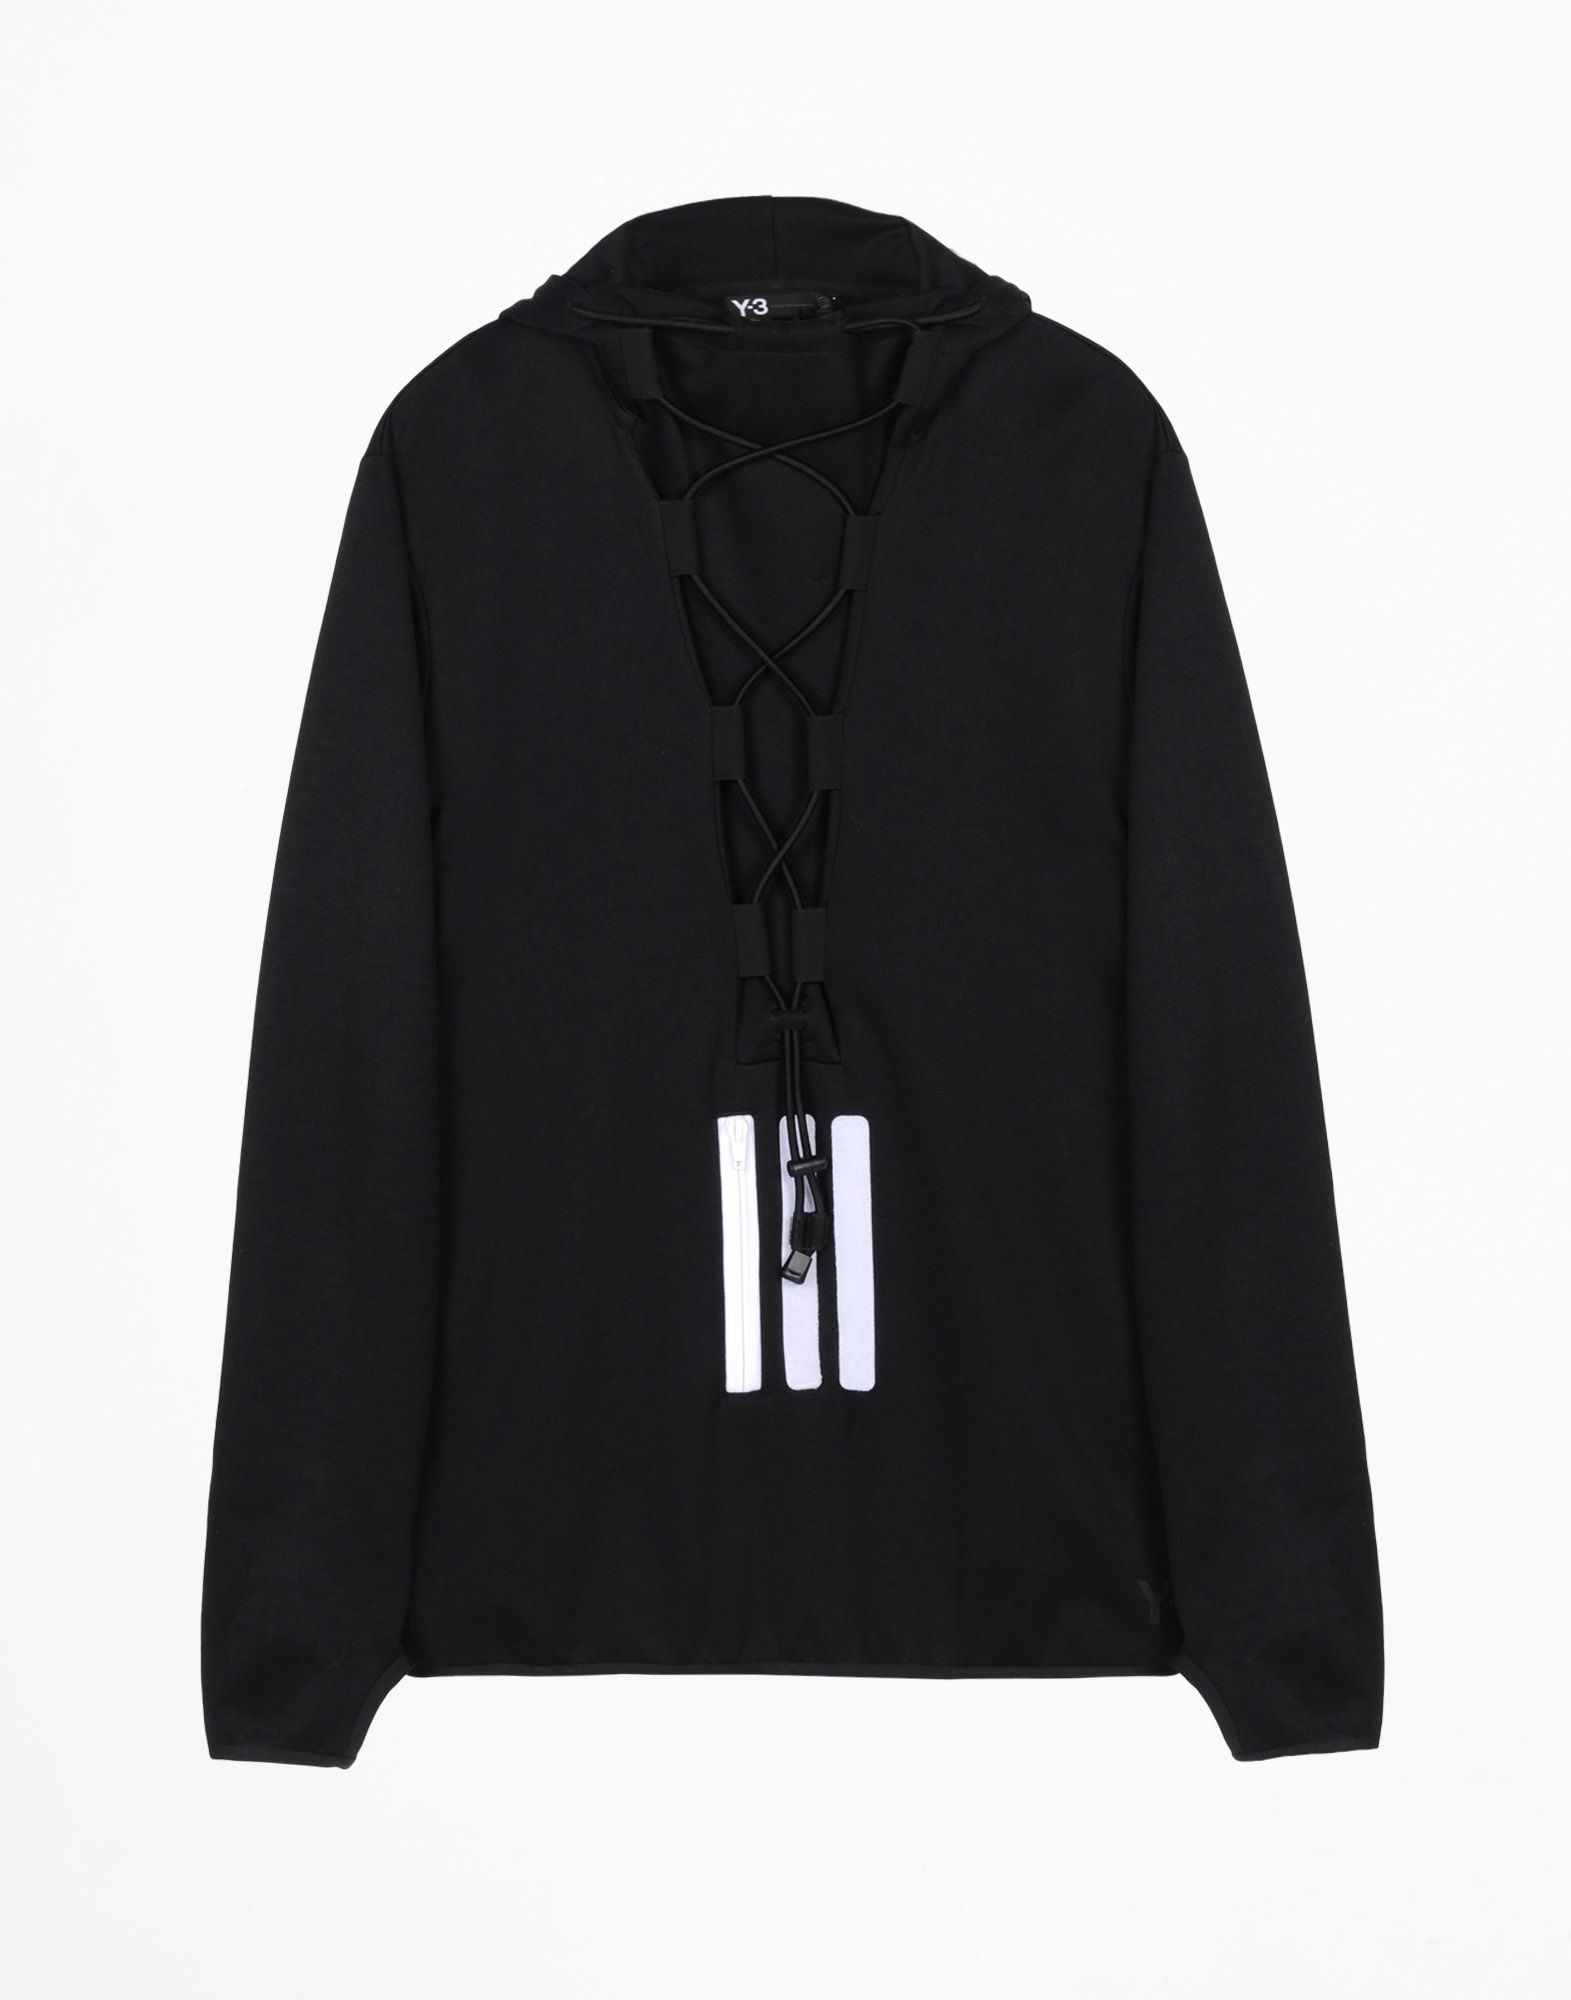 Y 3 3S TRACK HOODIE for Men | Adidas Y-3 Official Store